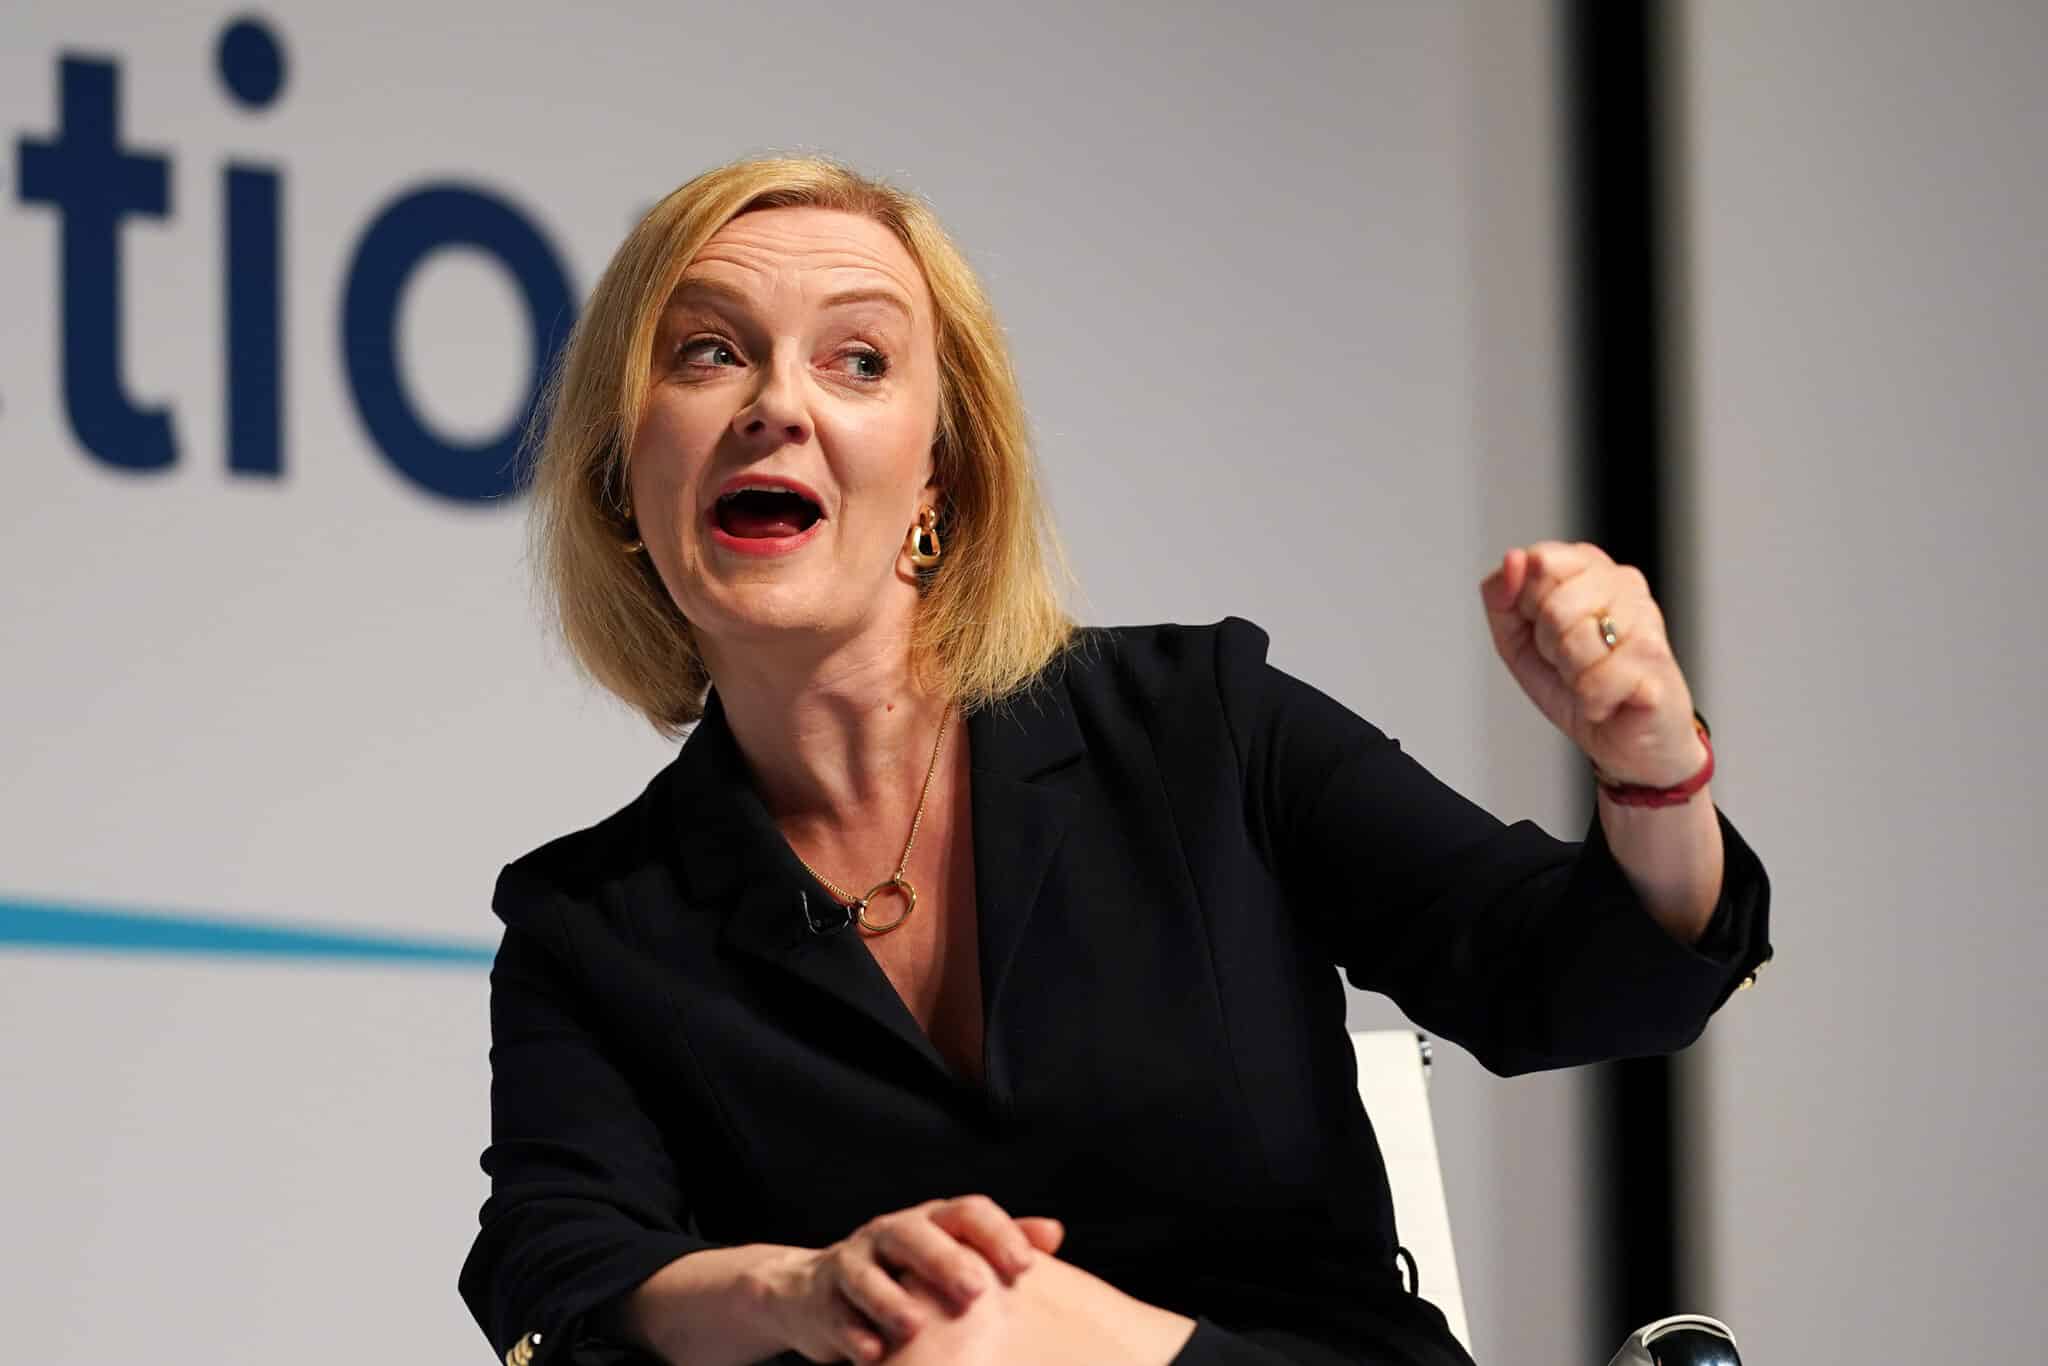 DARLINGTON, ENGLAND - AUGUST 9: British Foreign Secretary Liz Truss speaks at the fifth Conservative leadership hustings before an audience of Party members and media at the Darlington Hippodrome on August 9, 2022 in Darlington, England. The results of the leadership contest will be announced September 5. (Photo by Ian Forsyth/Getty Images)